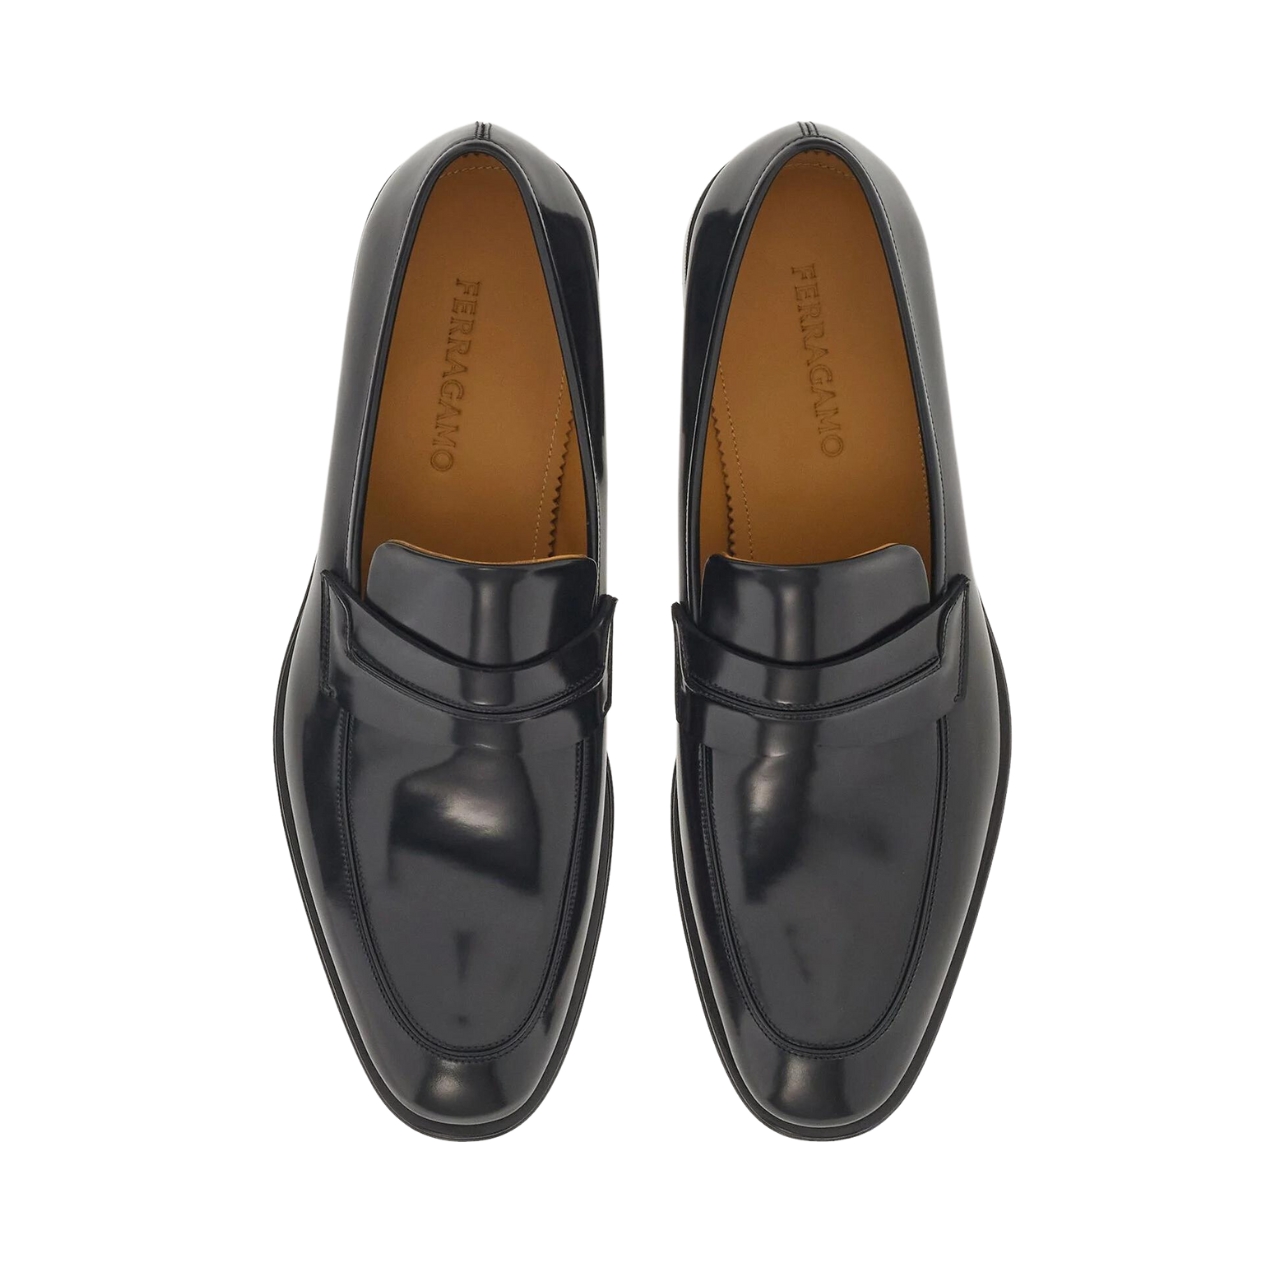 There are a lot of places you can wear your Dunks. A masquerade ball isn’t one of them. For that occasion—and probably a few others—there’s timeless penny loafers like these ones from Ferragamo.